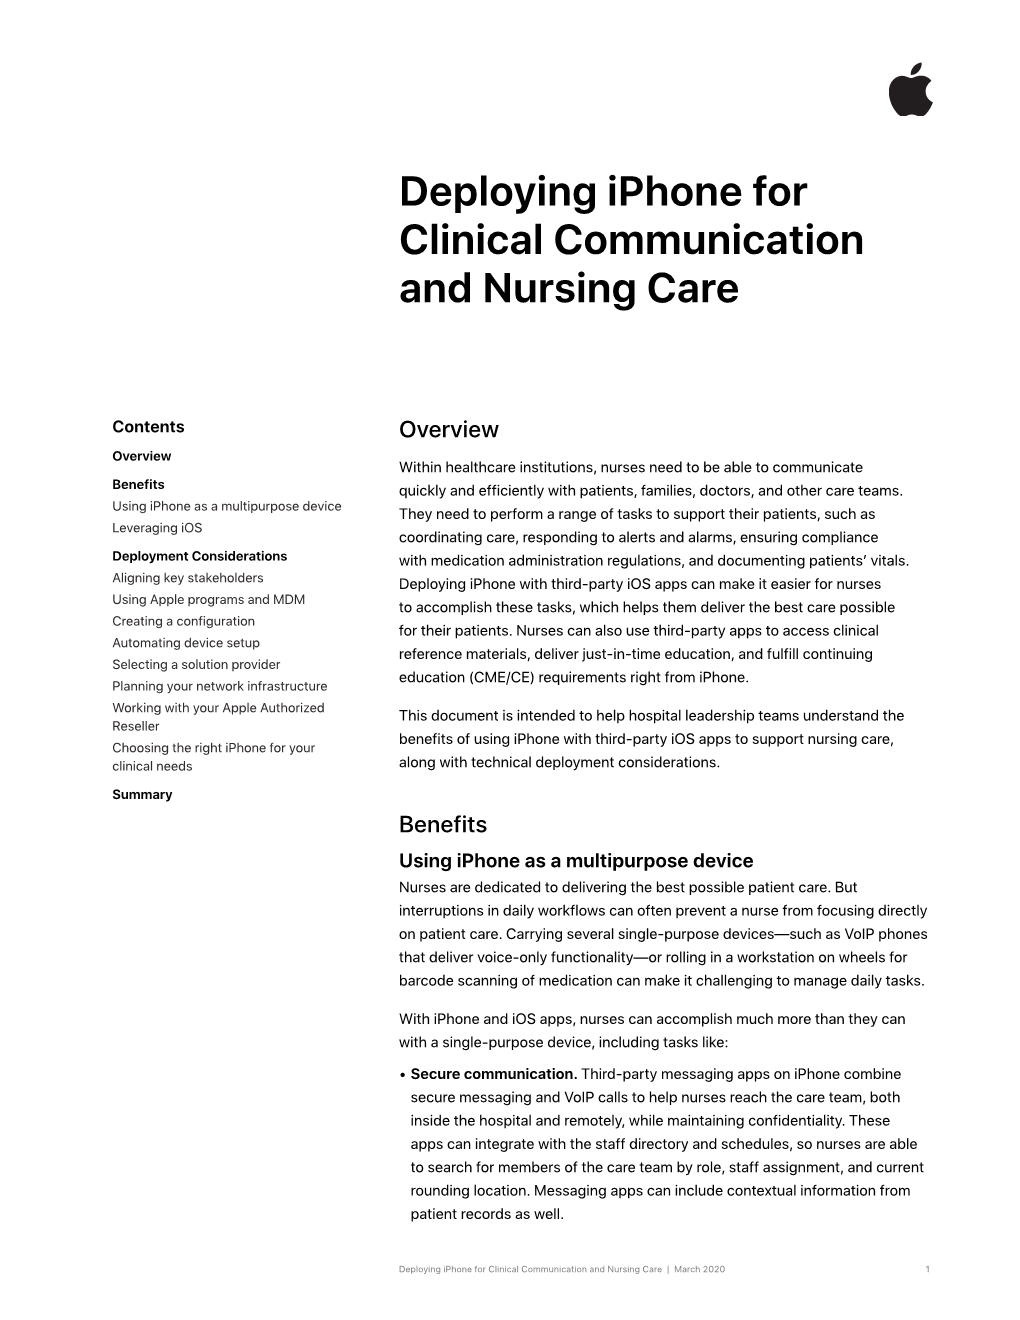 Deploying Iphone for Clinical Communication and Nursing Care